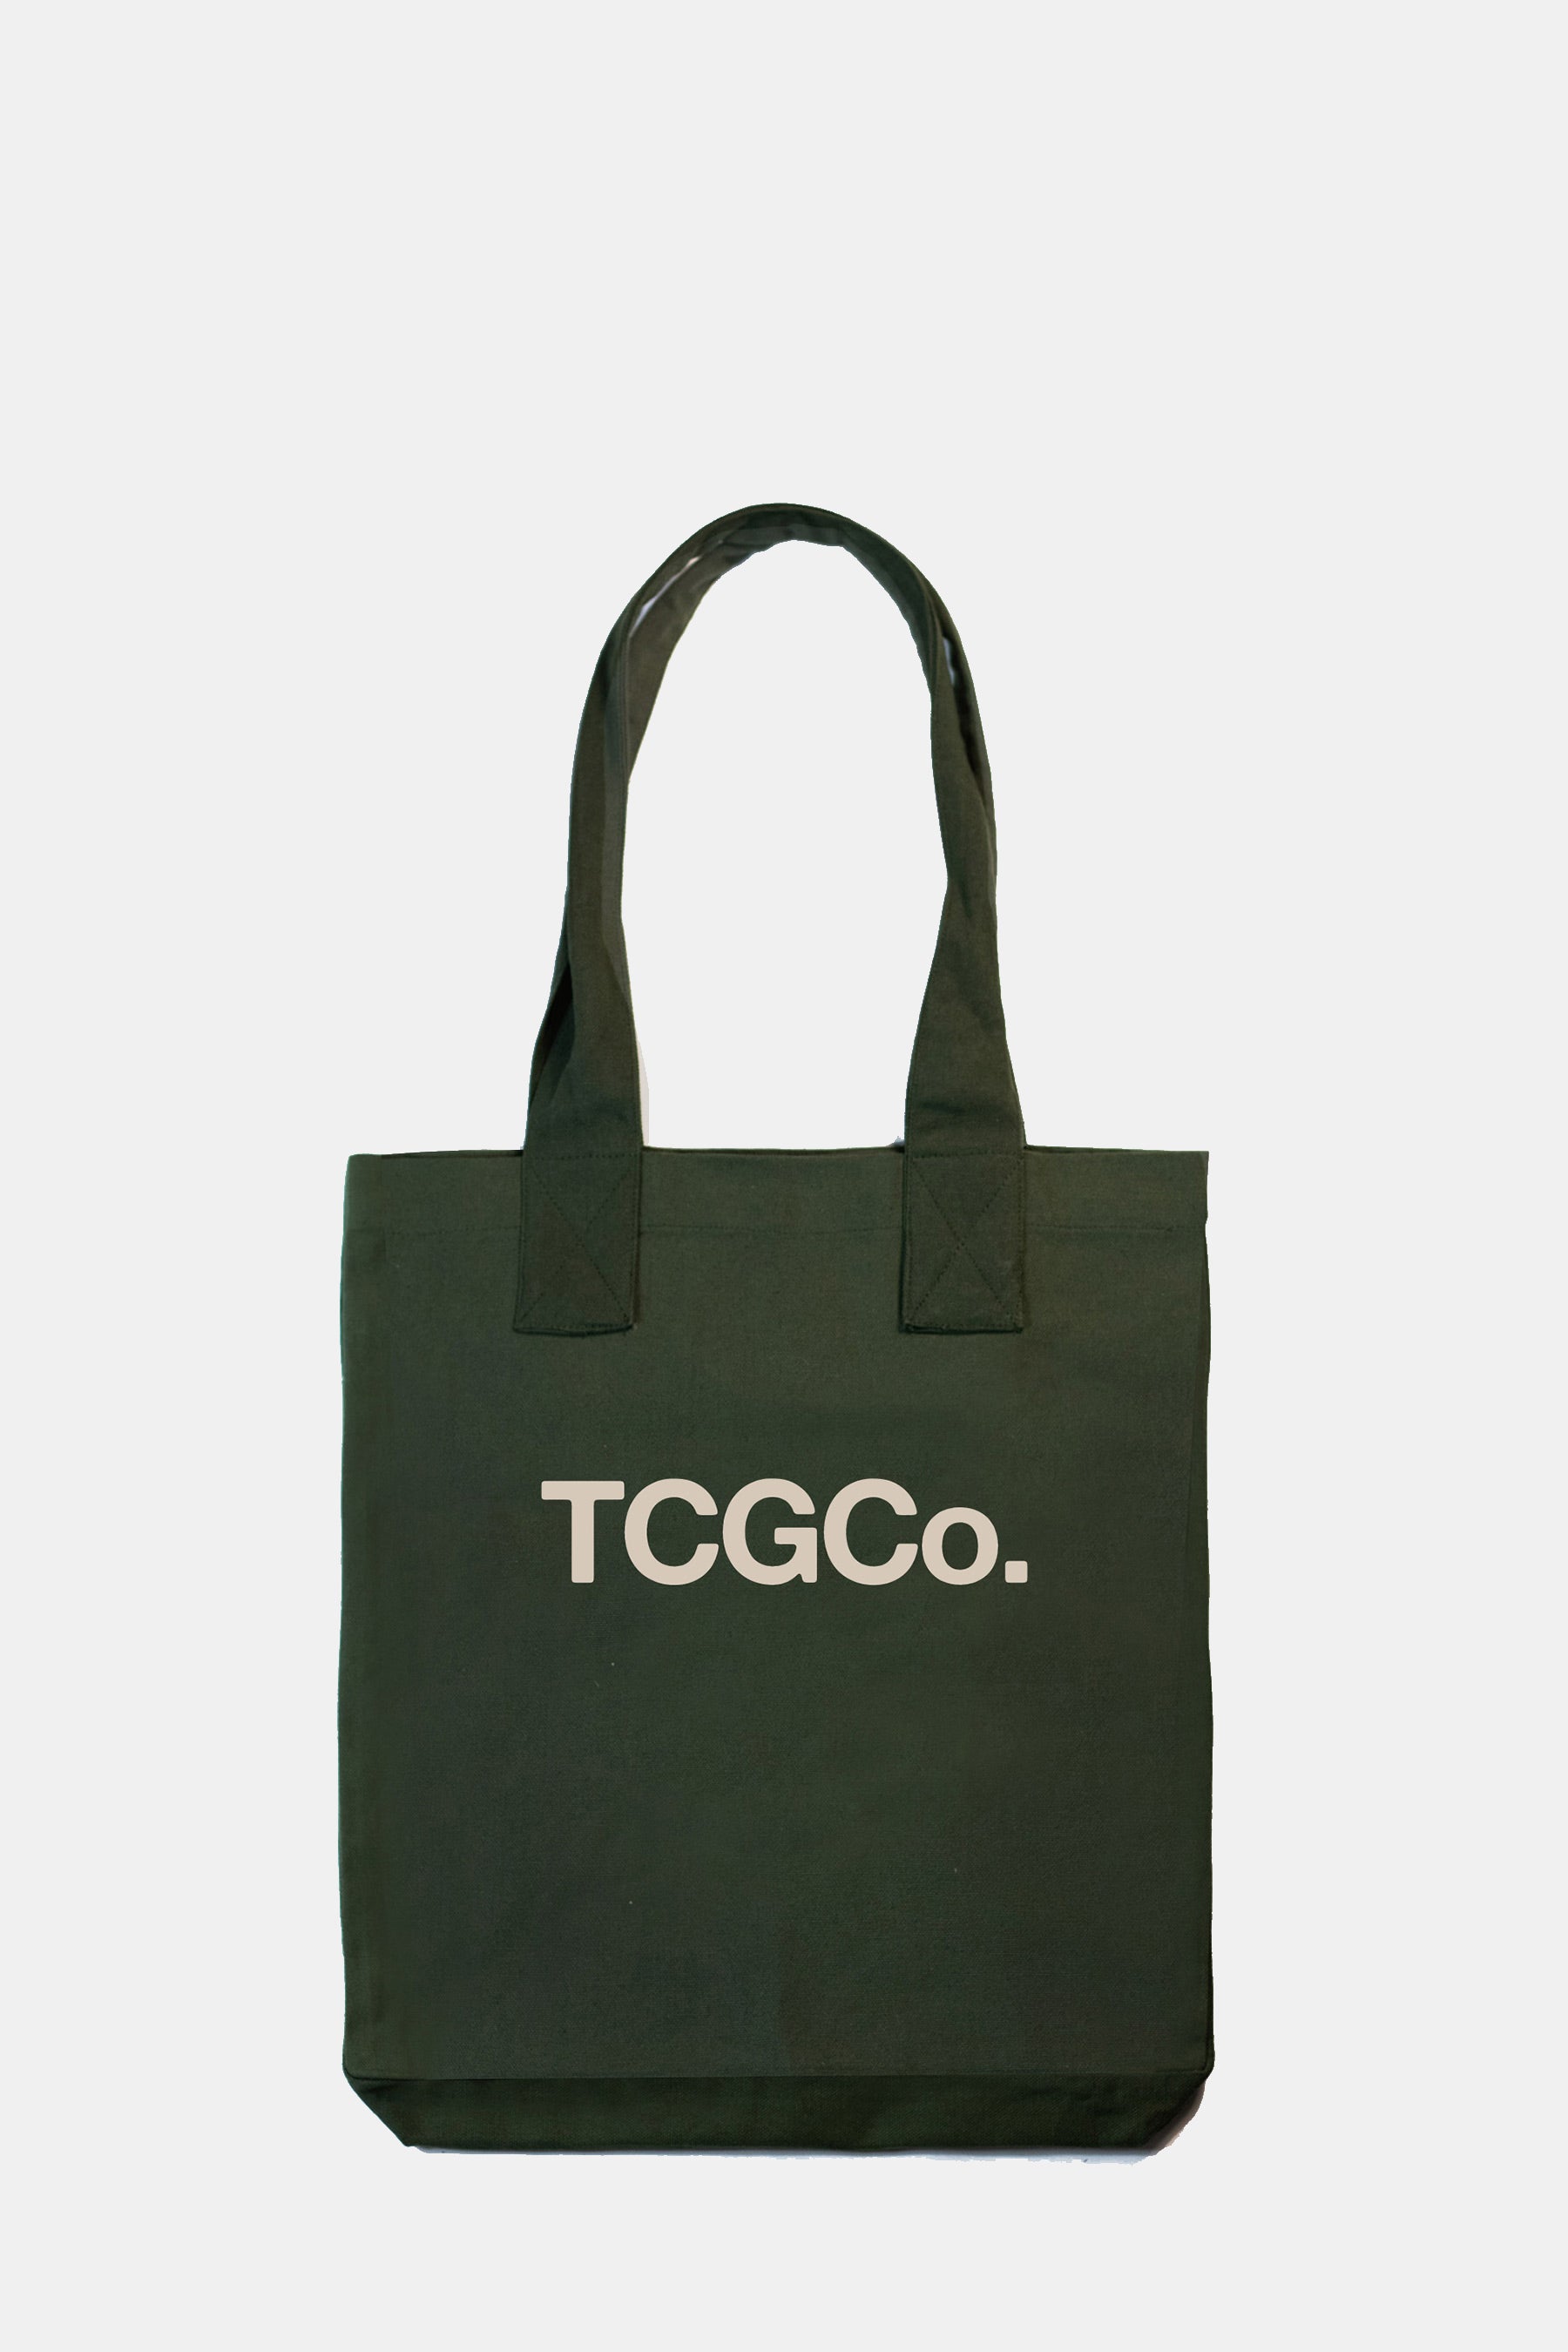 Olive 100% Recycled Cotton Everyday Tote - Tcgco Logo